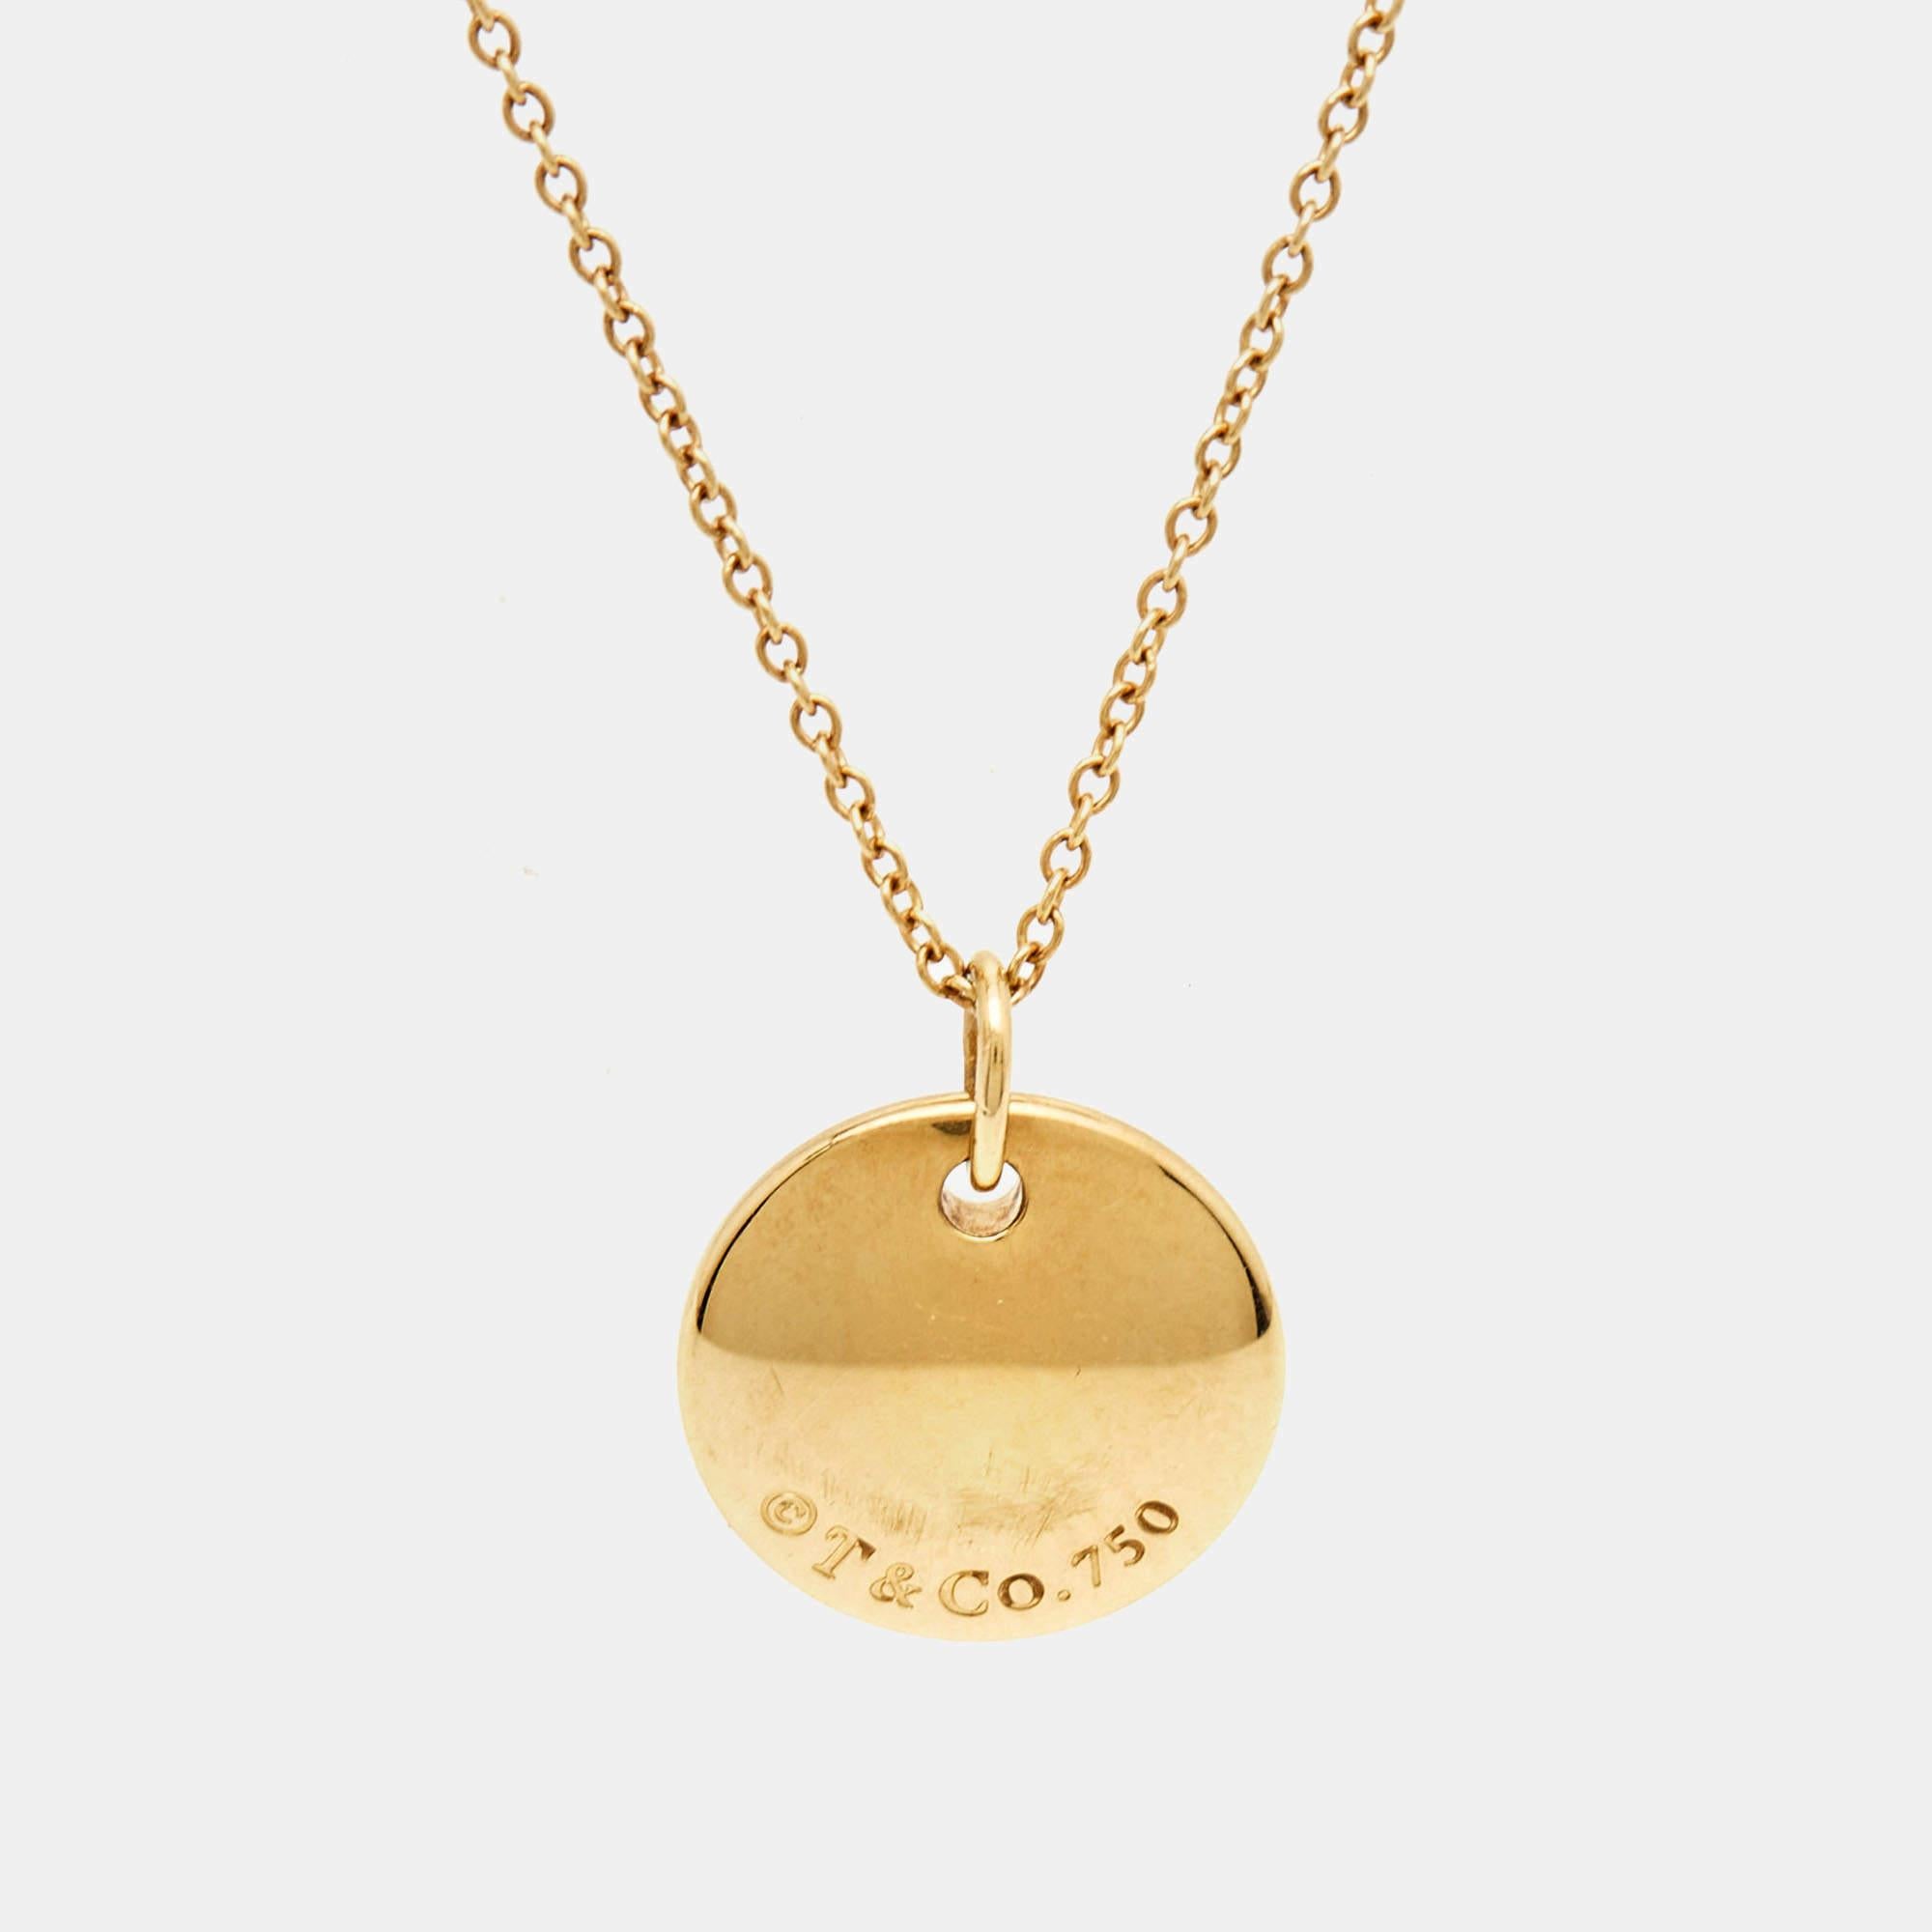 Elevate your style with the timeless elegance of the Tiffany & Co. Letter necklace. Crafted from lustrous 18k yellow gold, this exquisite piece features a delicate round pendant adorned with the letter 